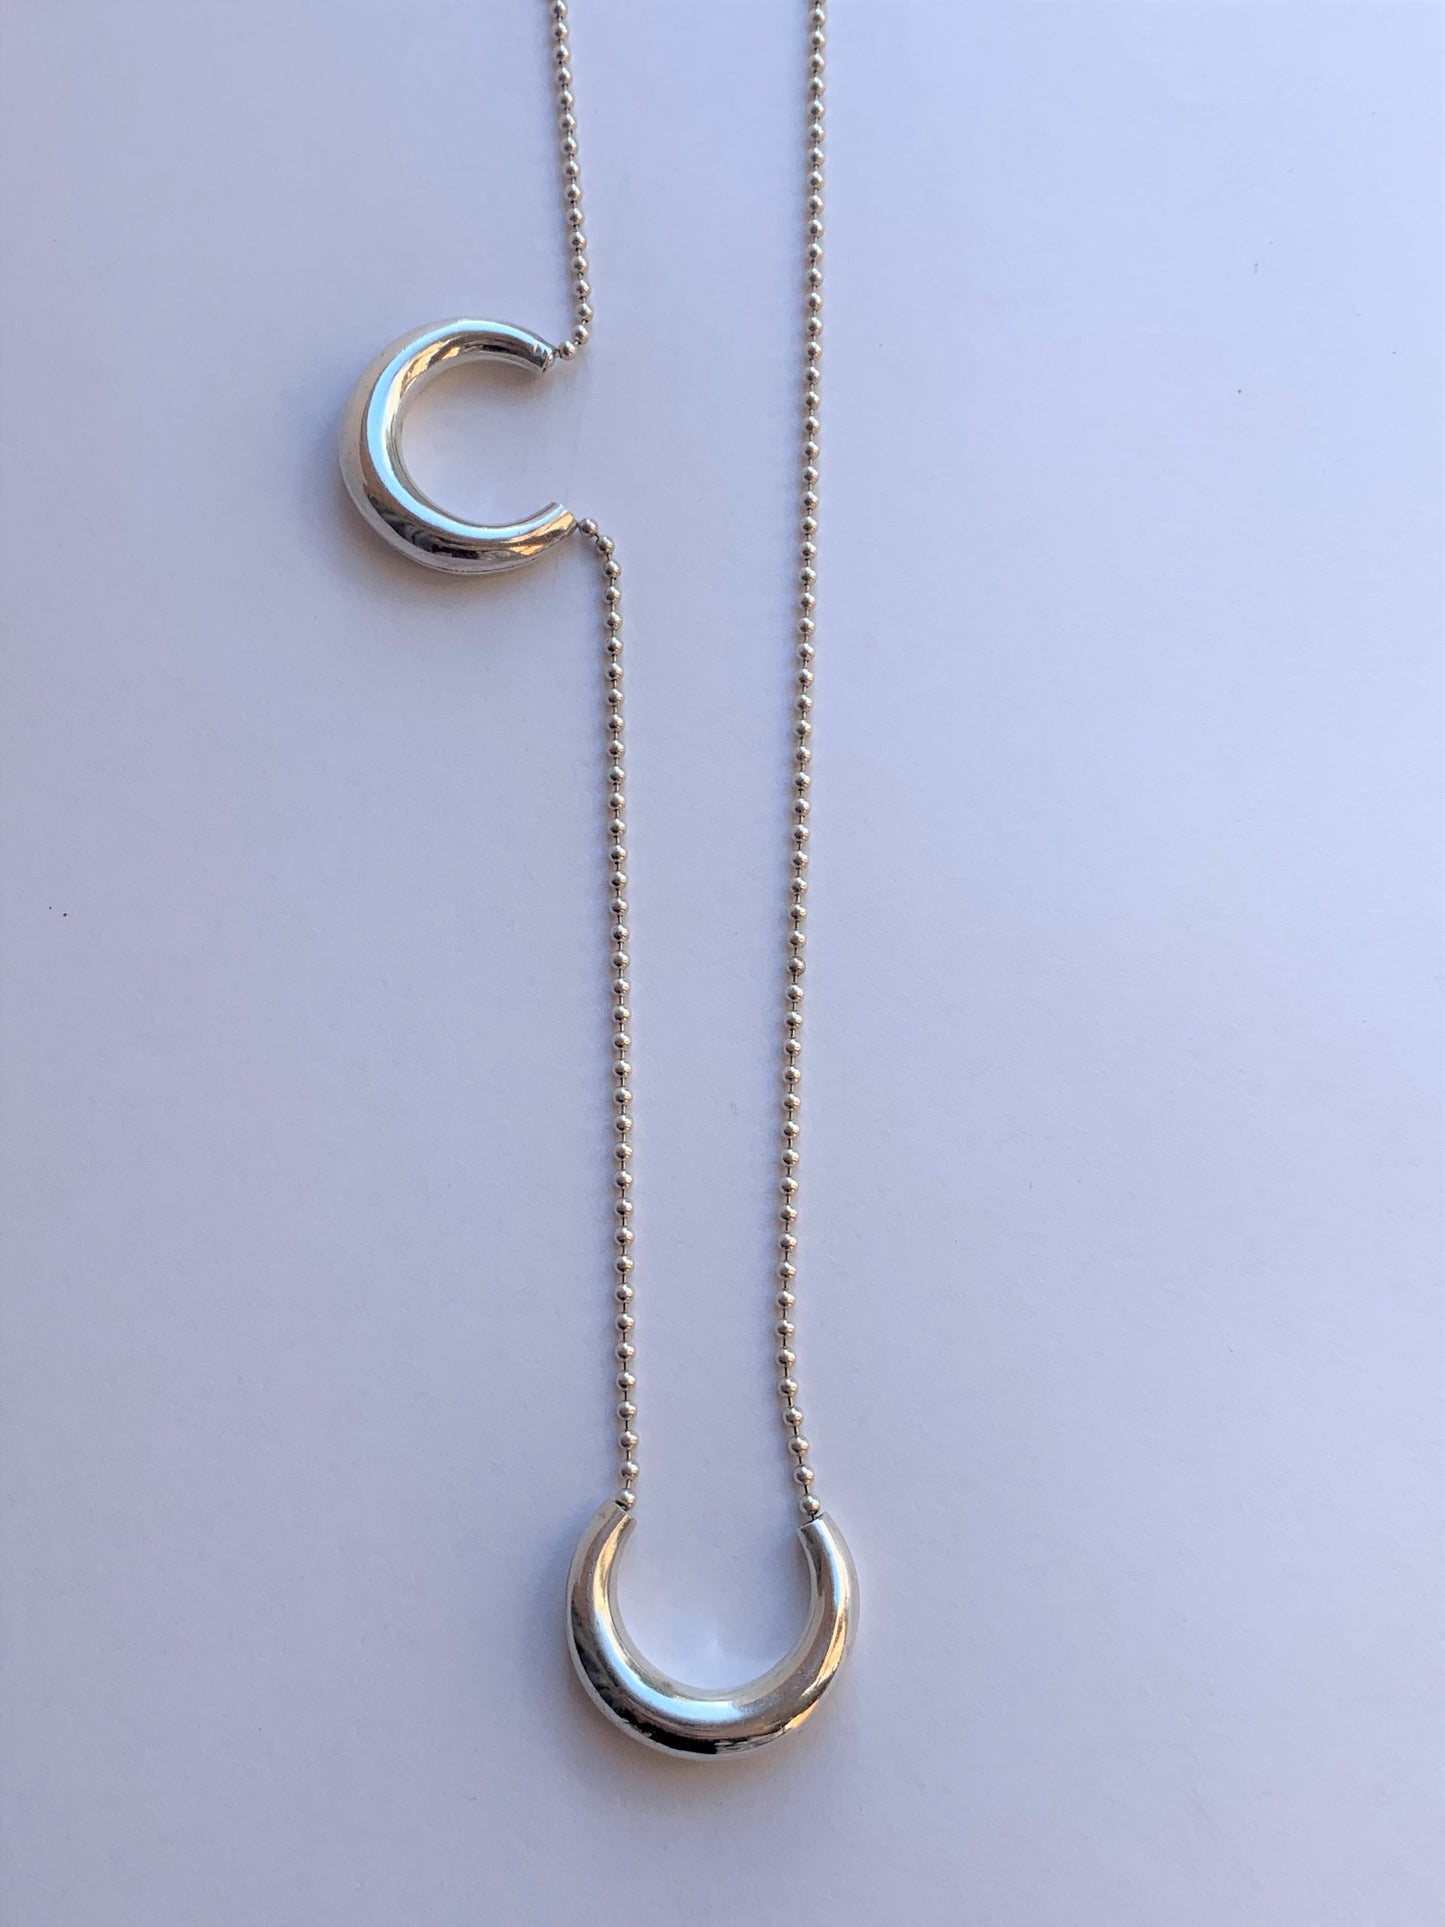 Unique Reclaimed Earrings Made Into Long Silver Necklace